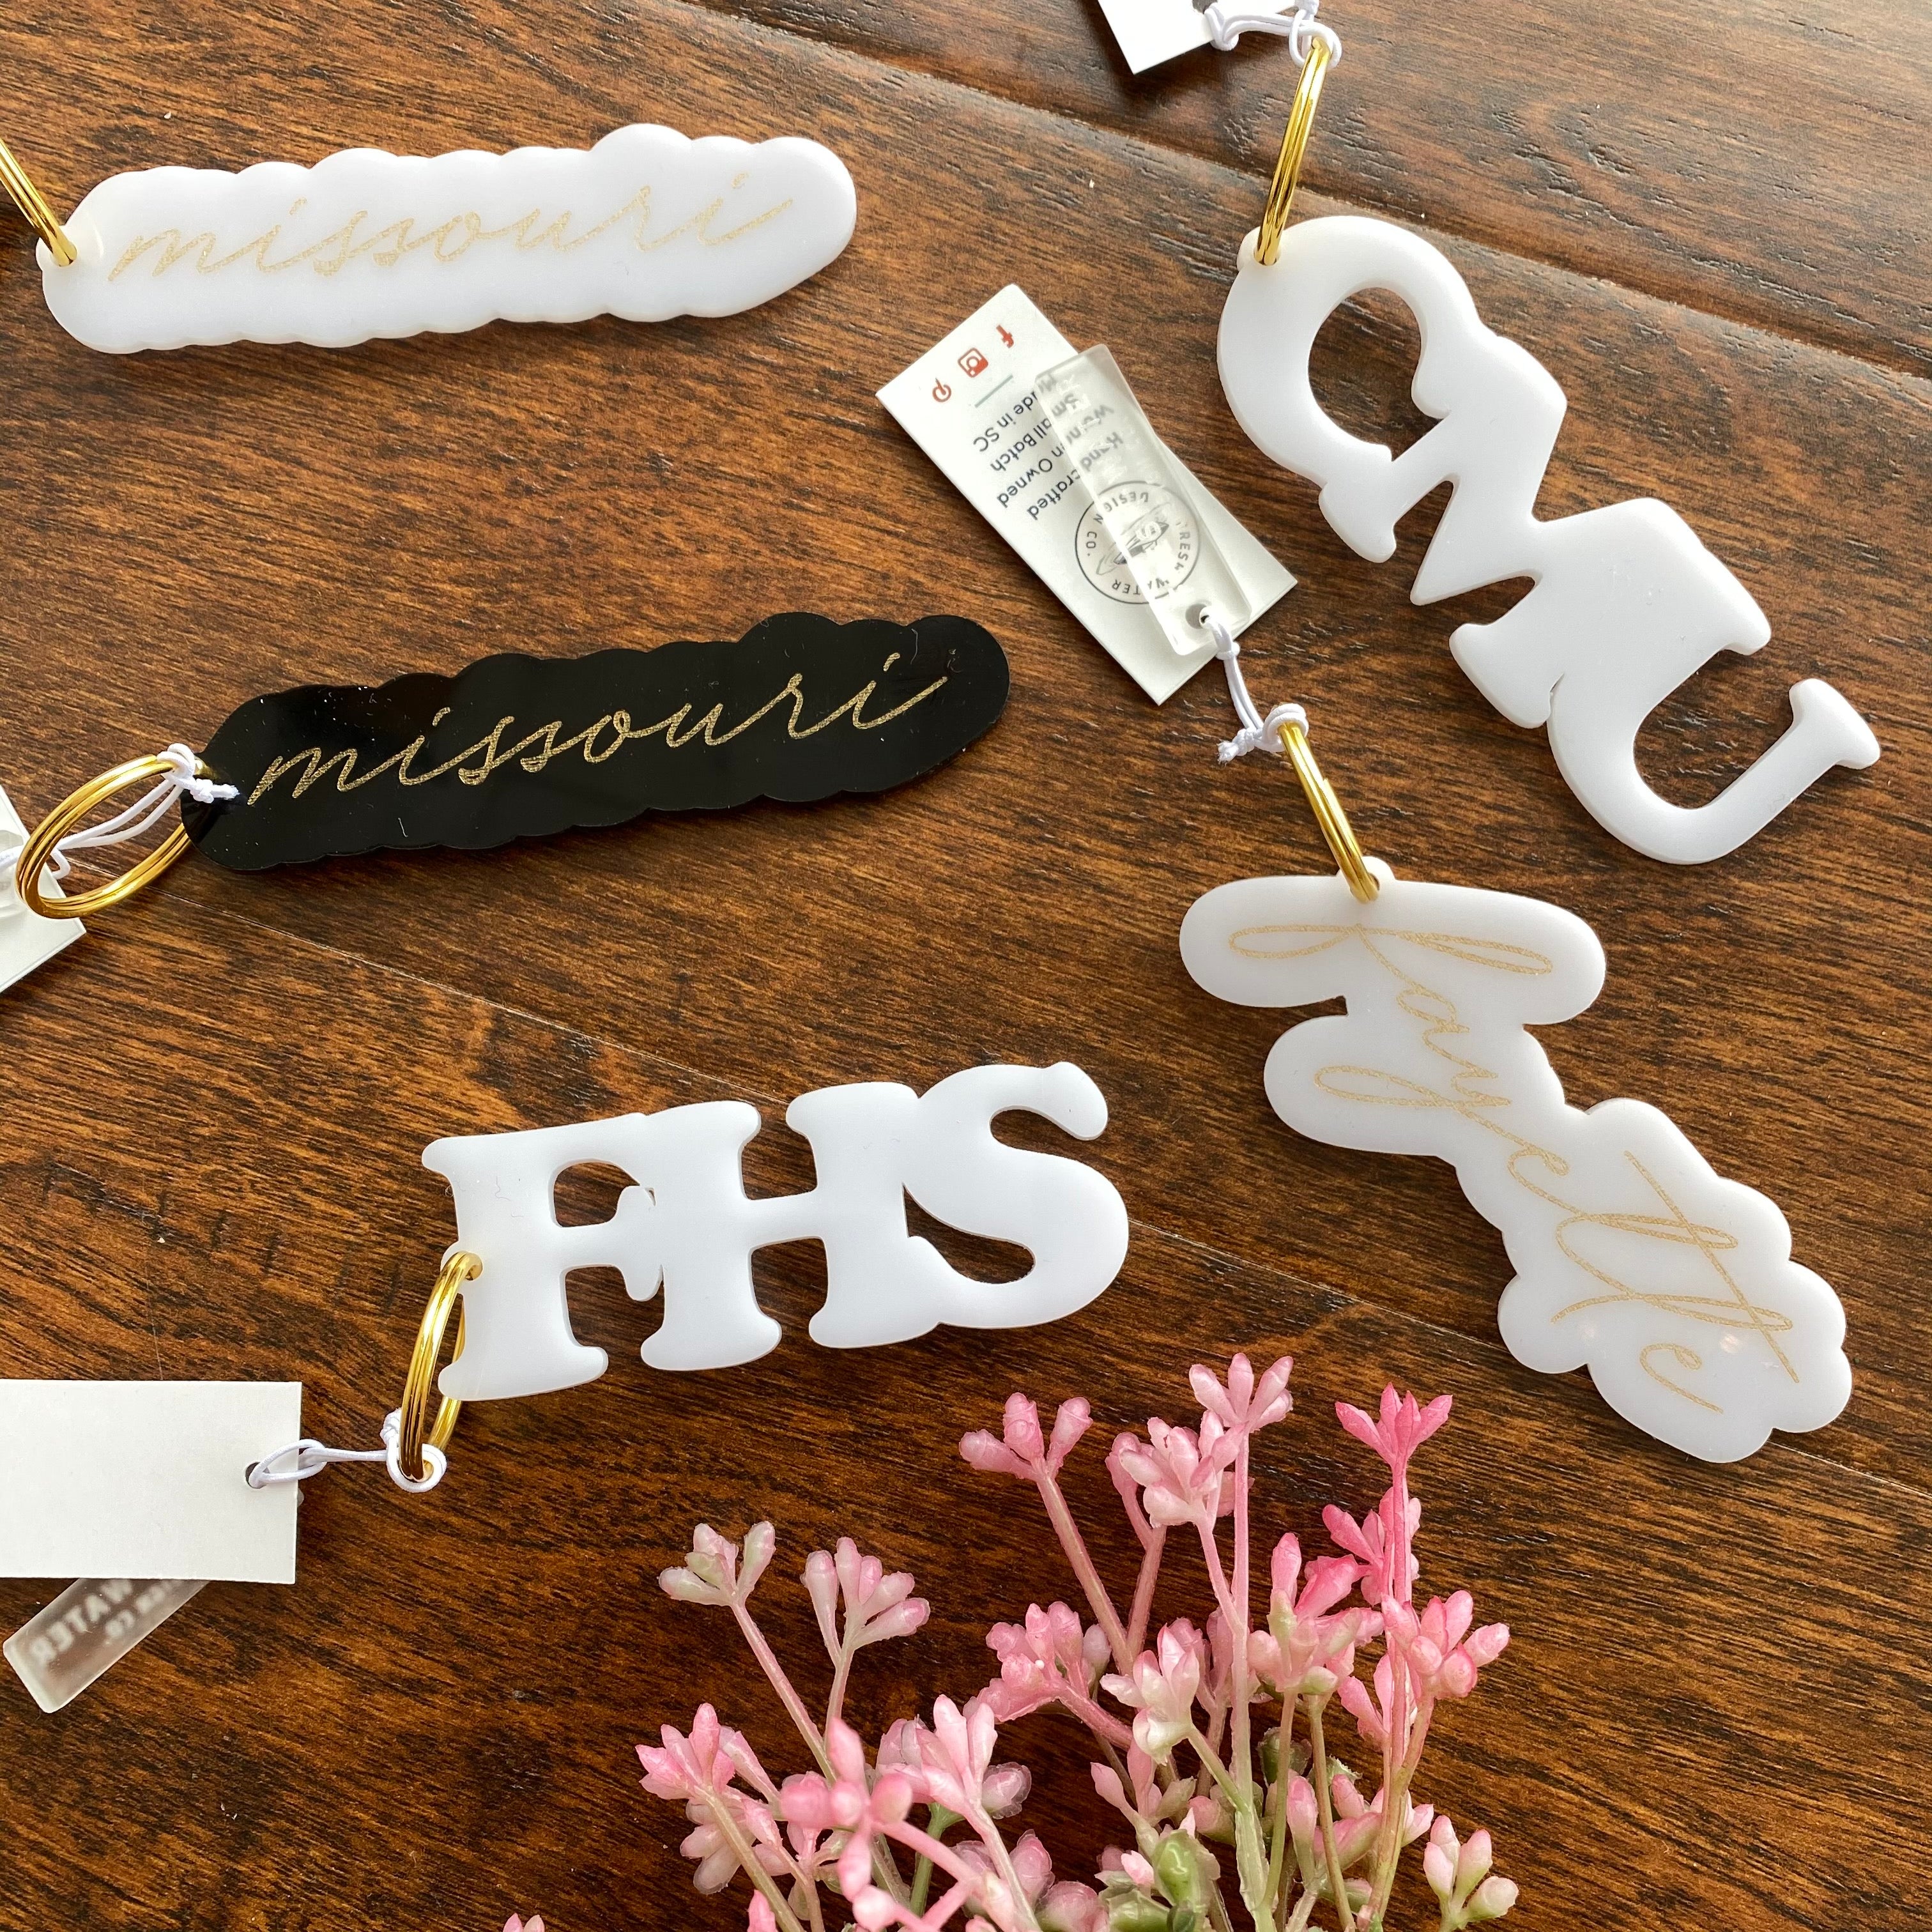 White missouri, black missouri, CMU, FHS, and Fayette acrylic keychains sit together on wood surface with pink florals